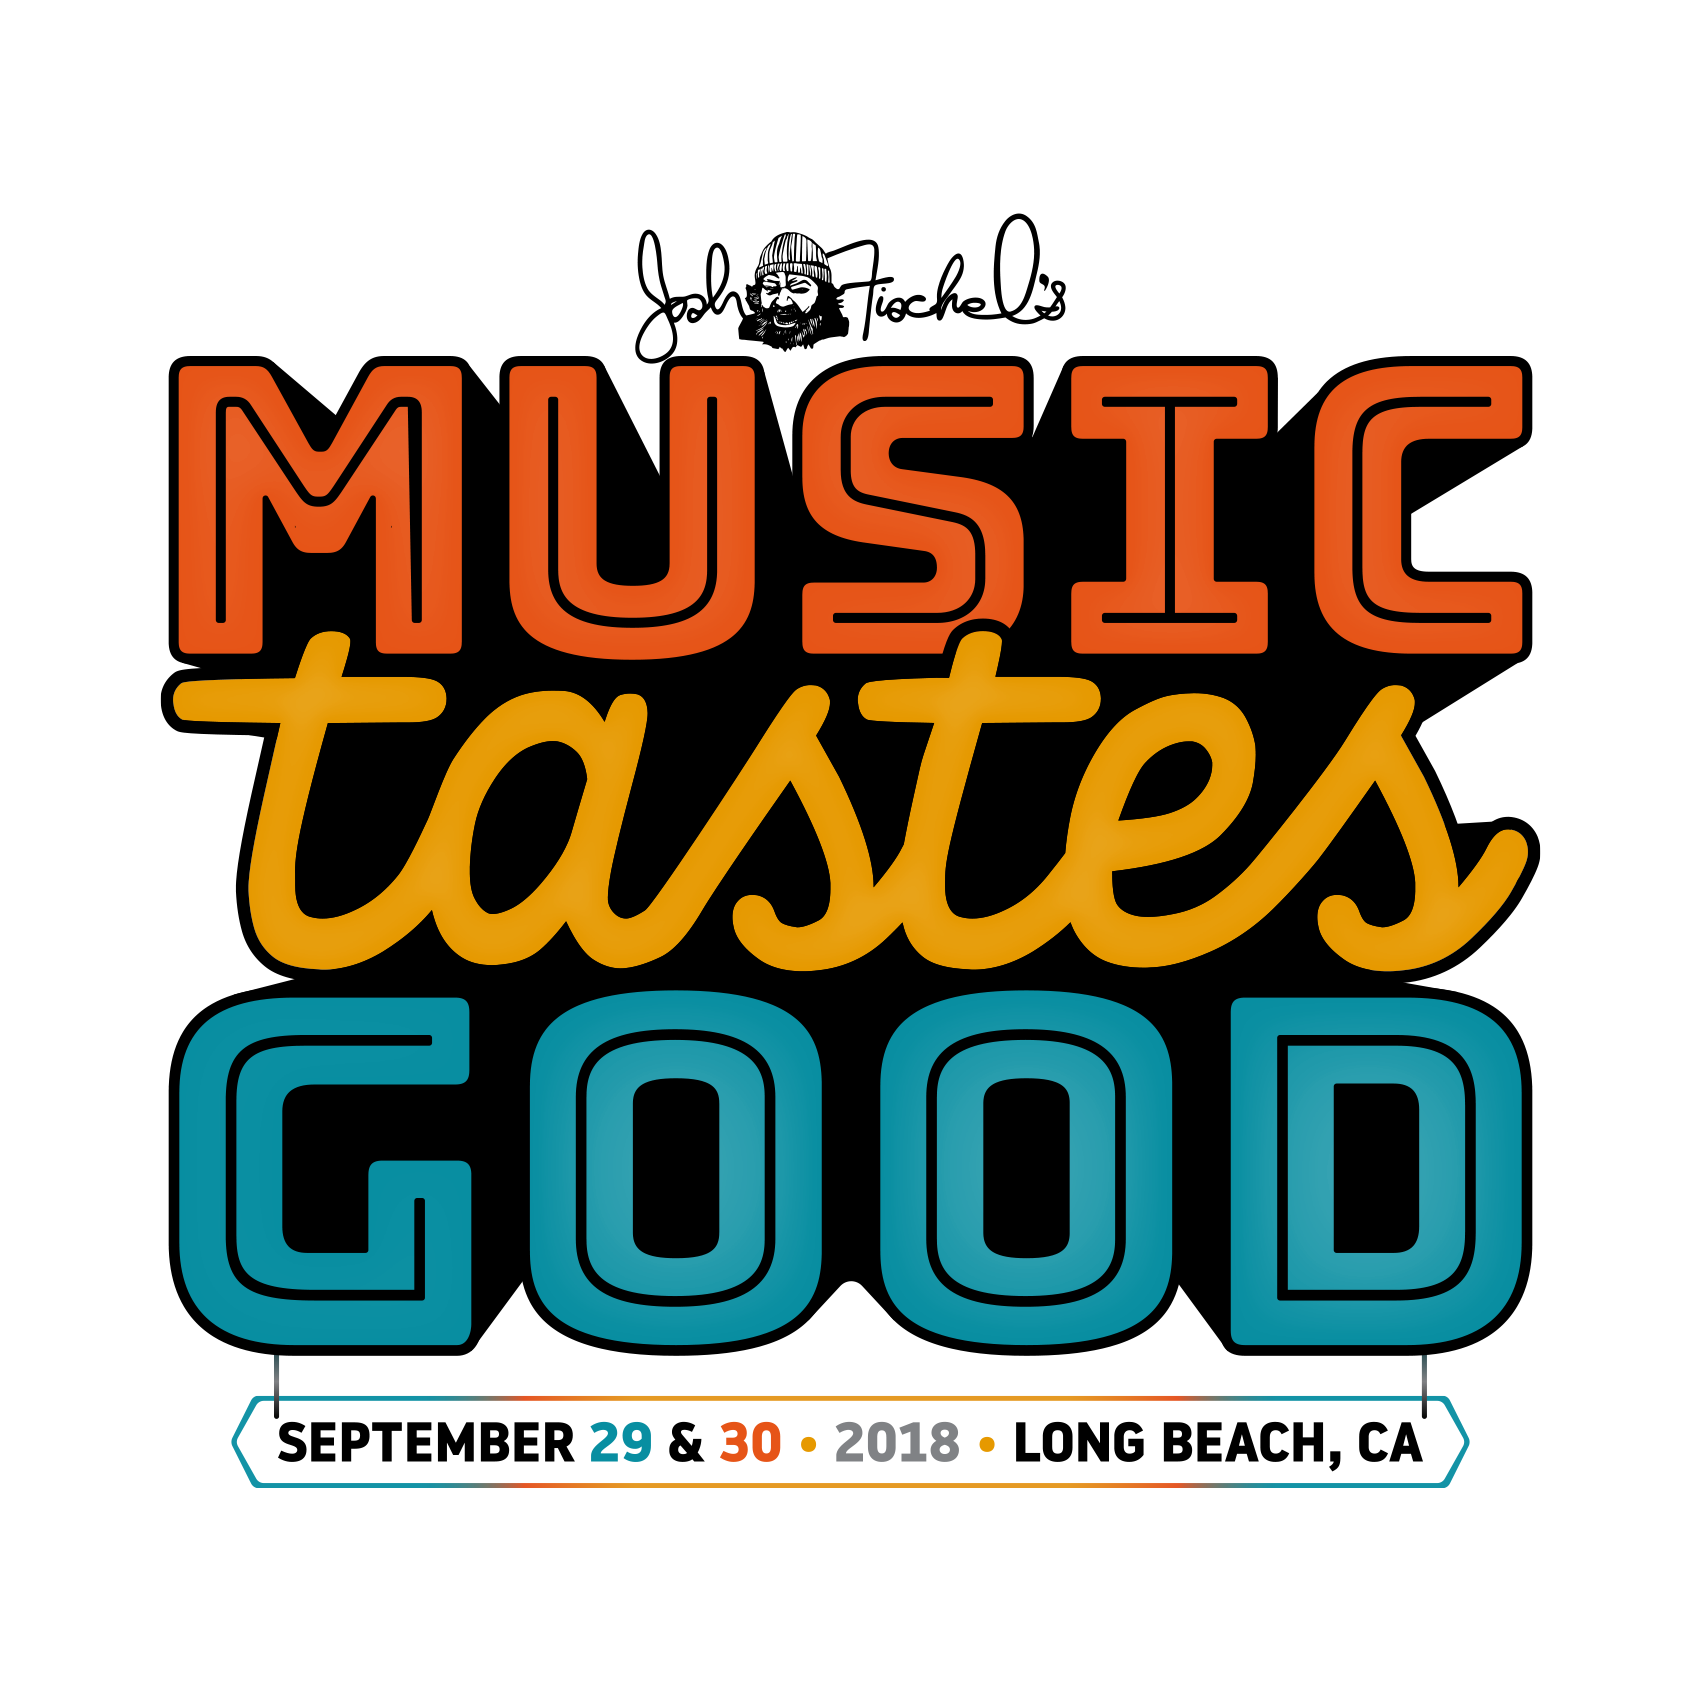 Two of the best worlds ever collide to make one amazing event–music and food